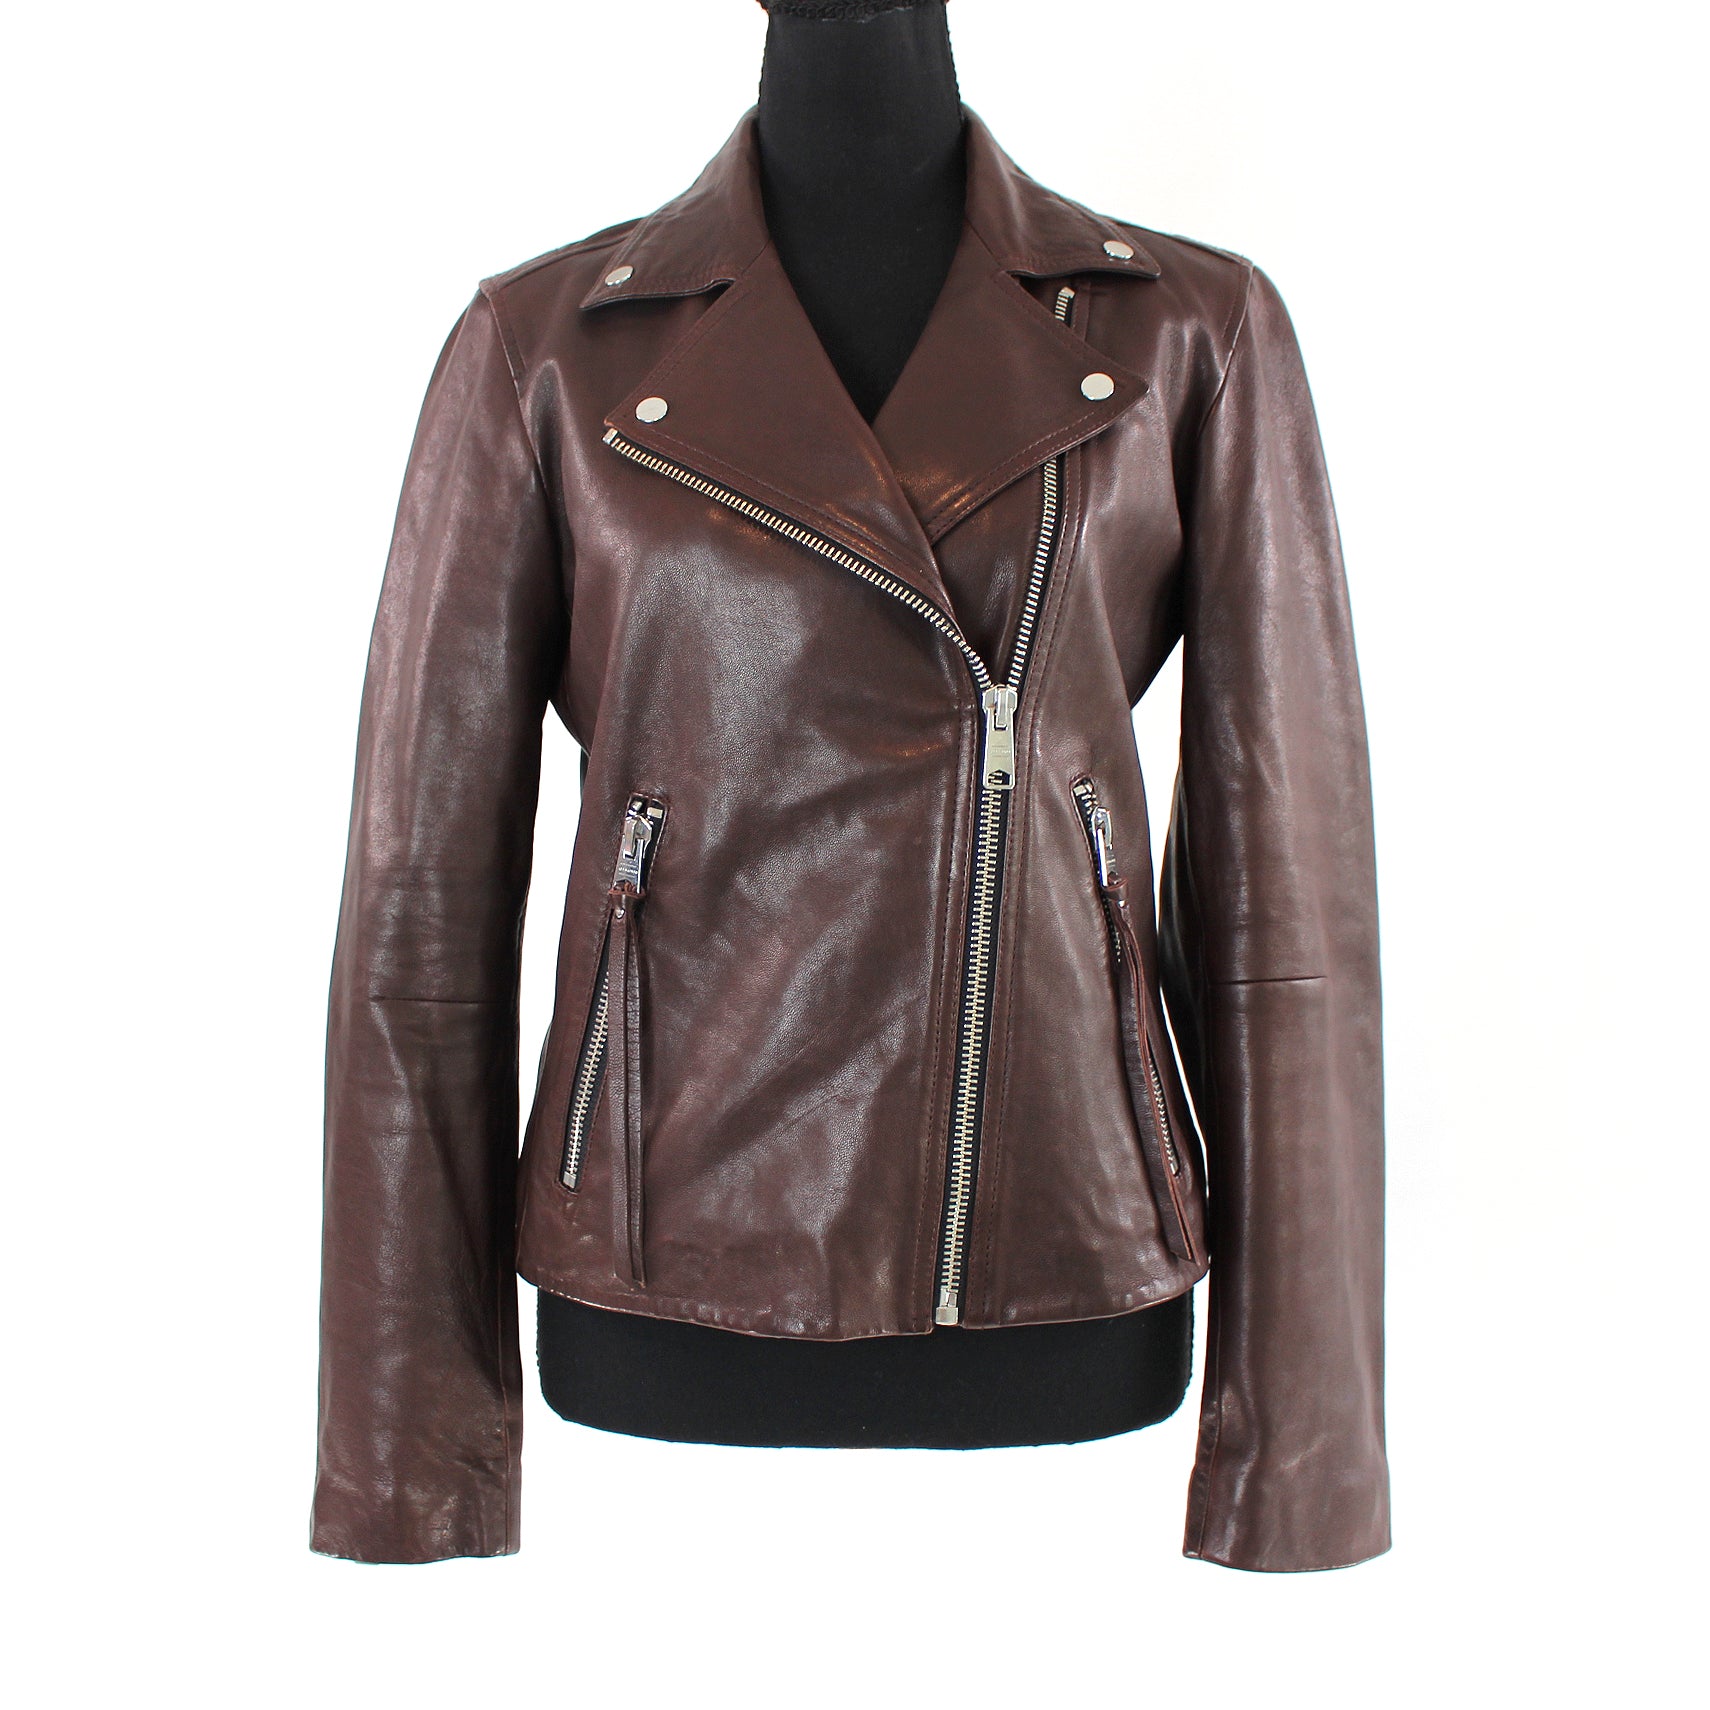 Jacket The Closet Biker – Saints Dalby Leather Zip-Up All Oxblood York Brown New